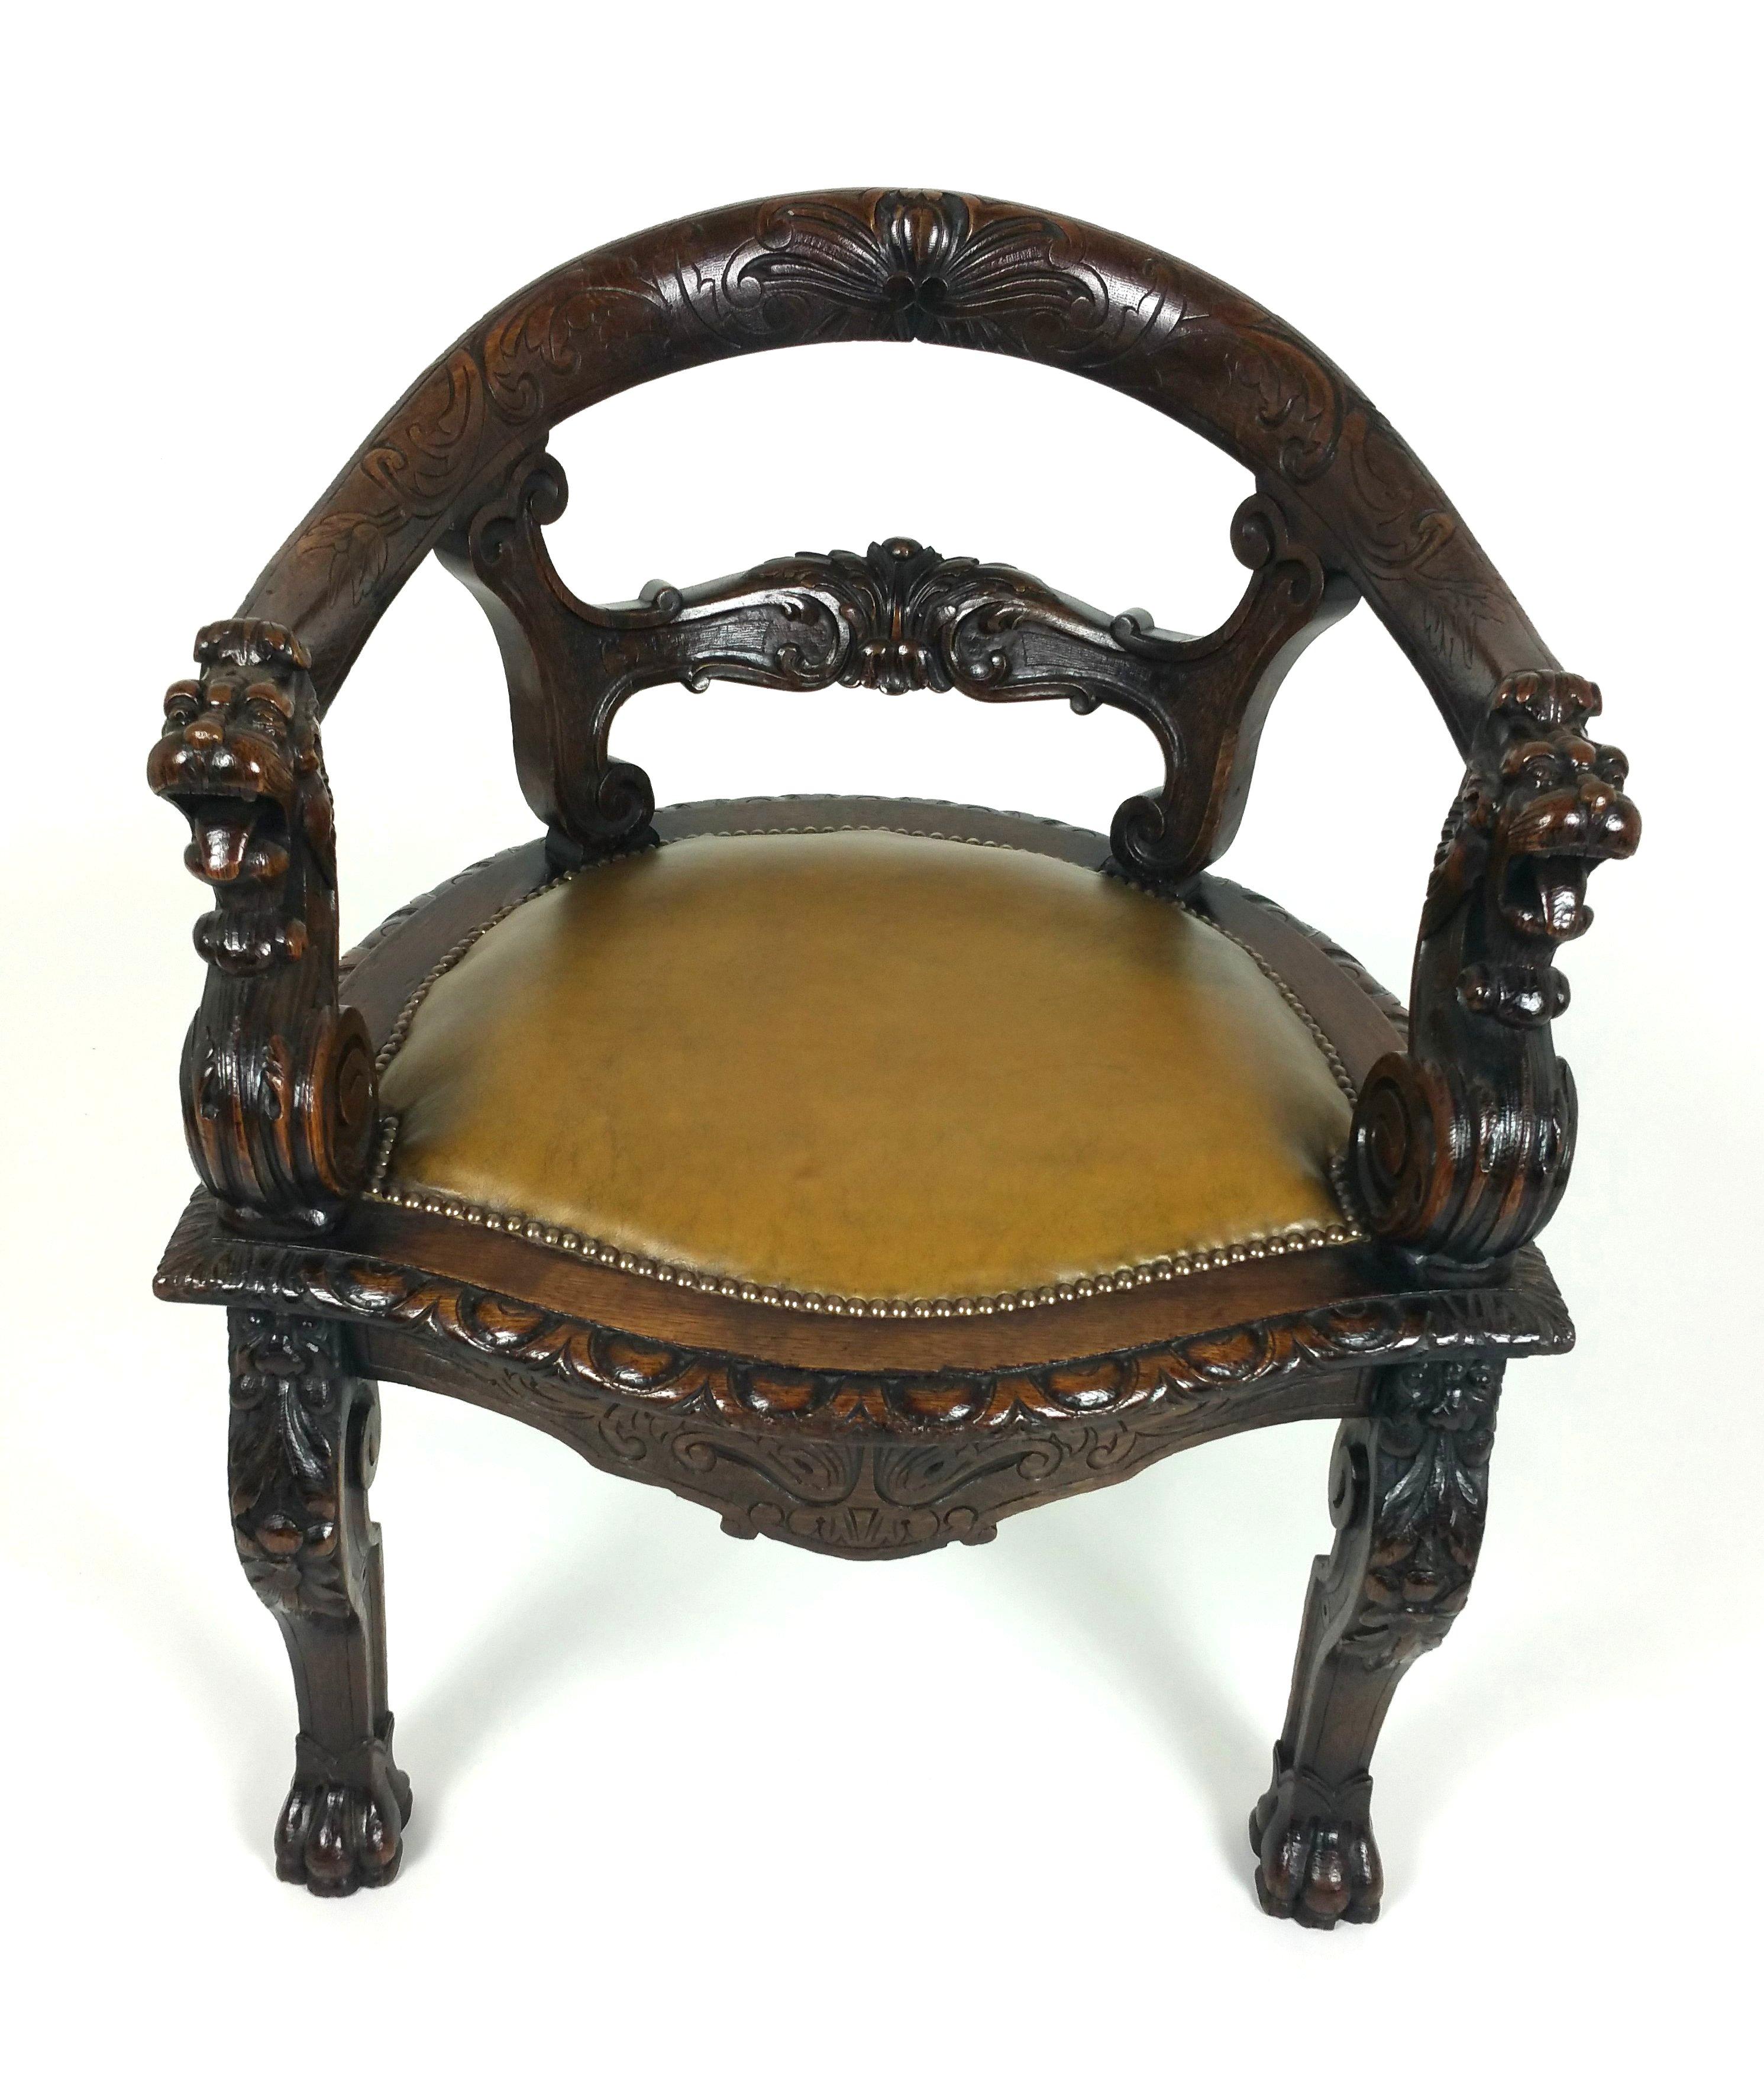 This superb and very handsome mid-Victorian oak tub shaped desk chair is decorated with detailed carvings of scrolls around the entire front of the chair and finished with a lion’s head on each arm rest end, as well as the top of the front legs. The